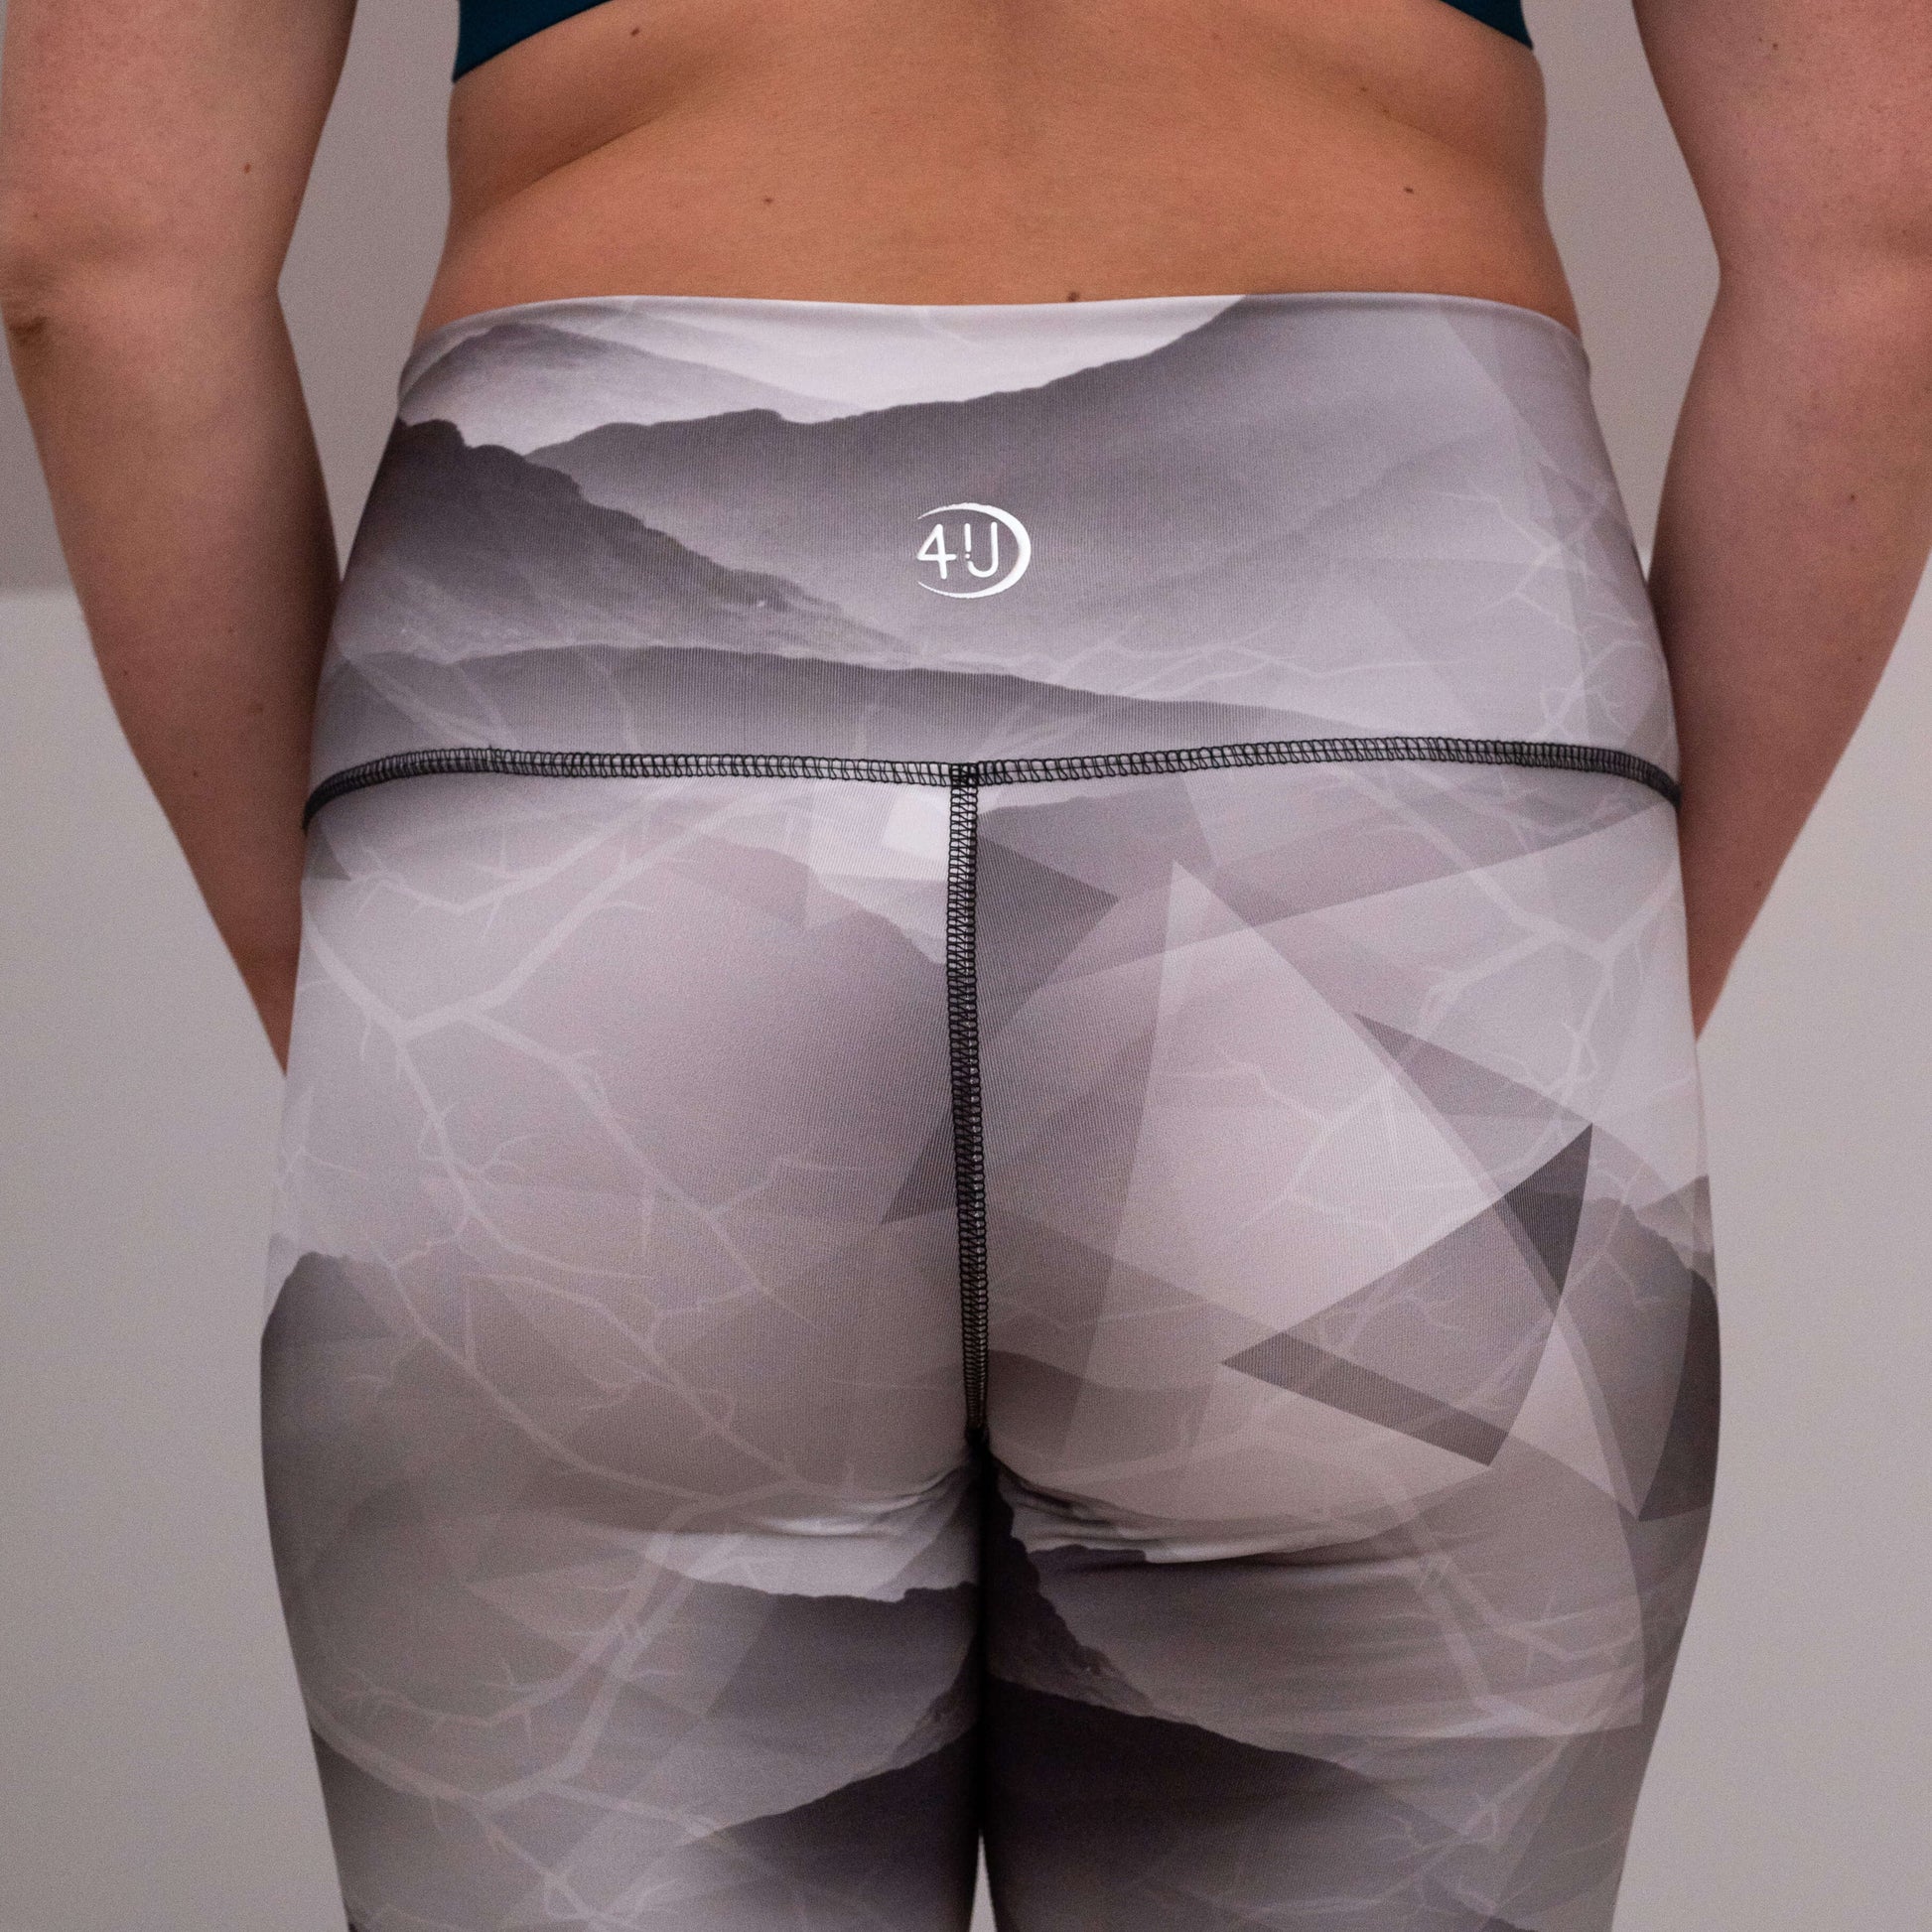 Eco-friendly maternity leggings made of recycled plastic bottles